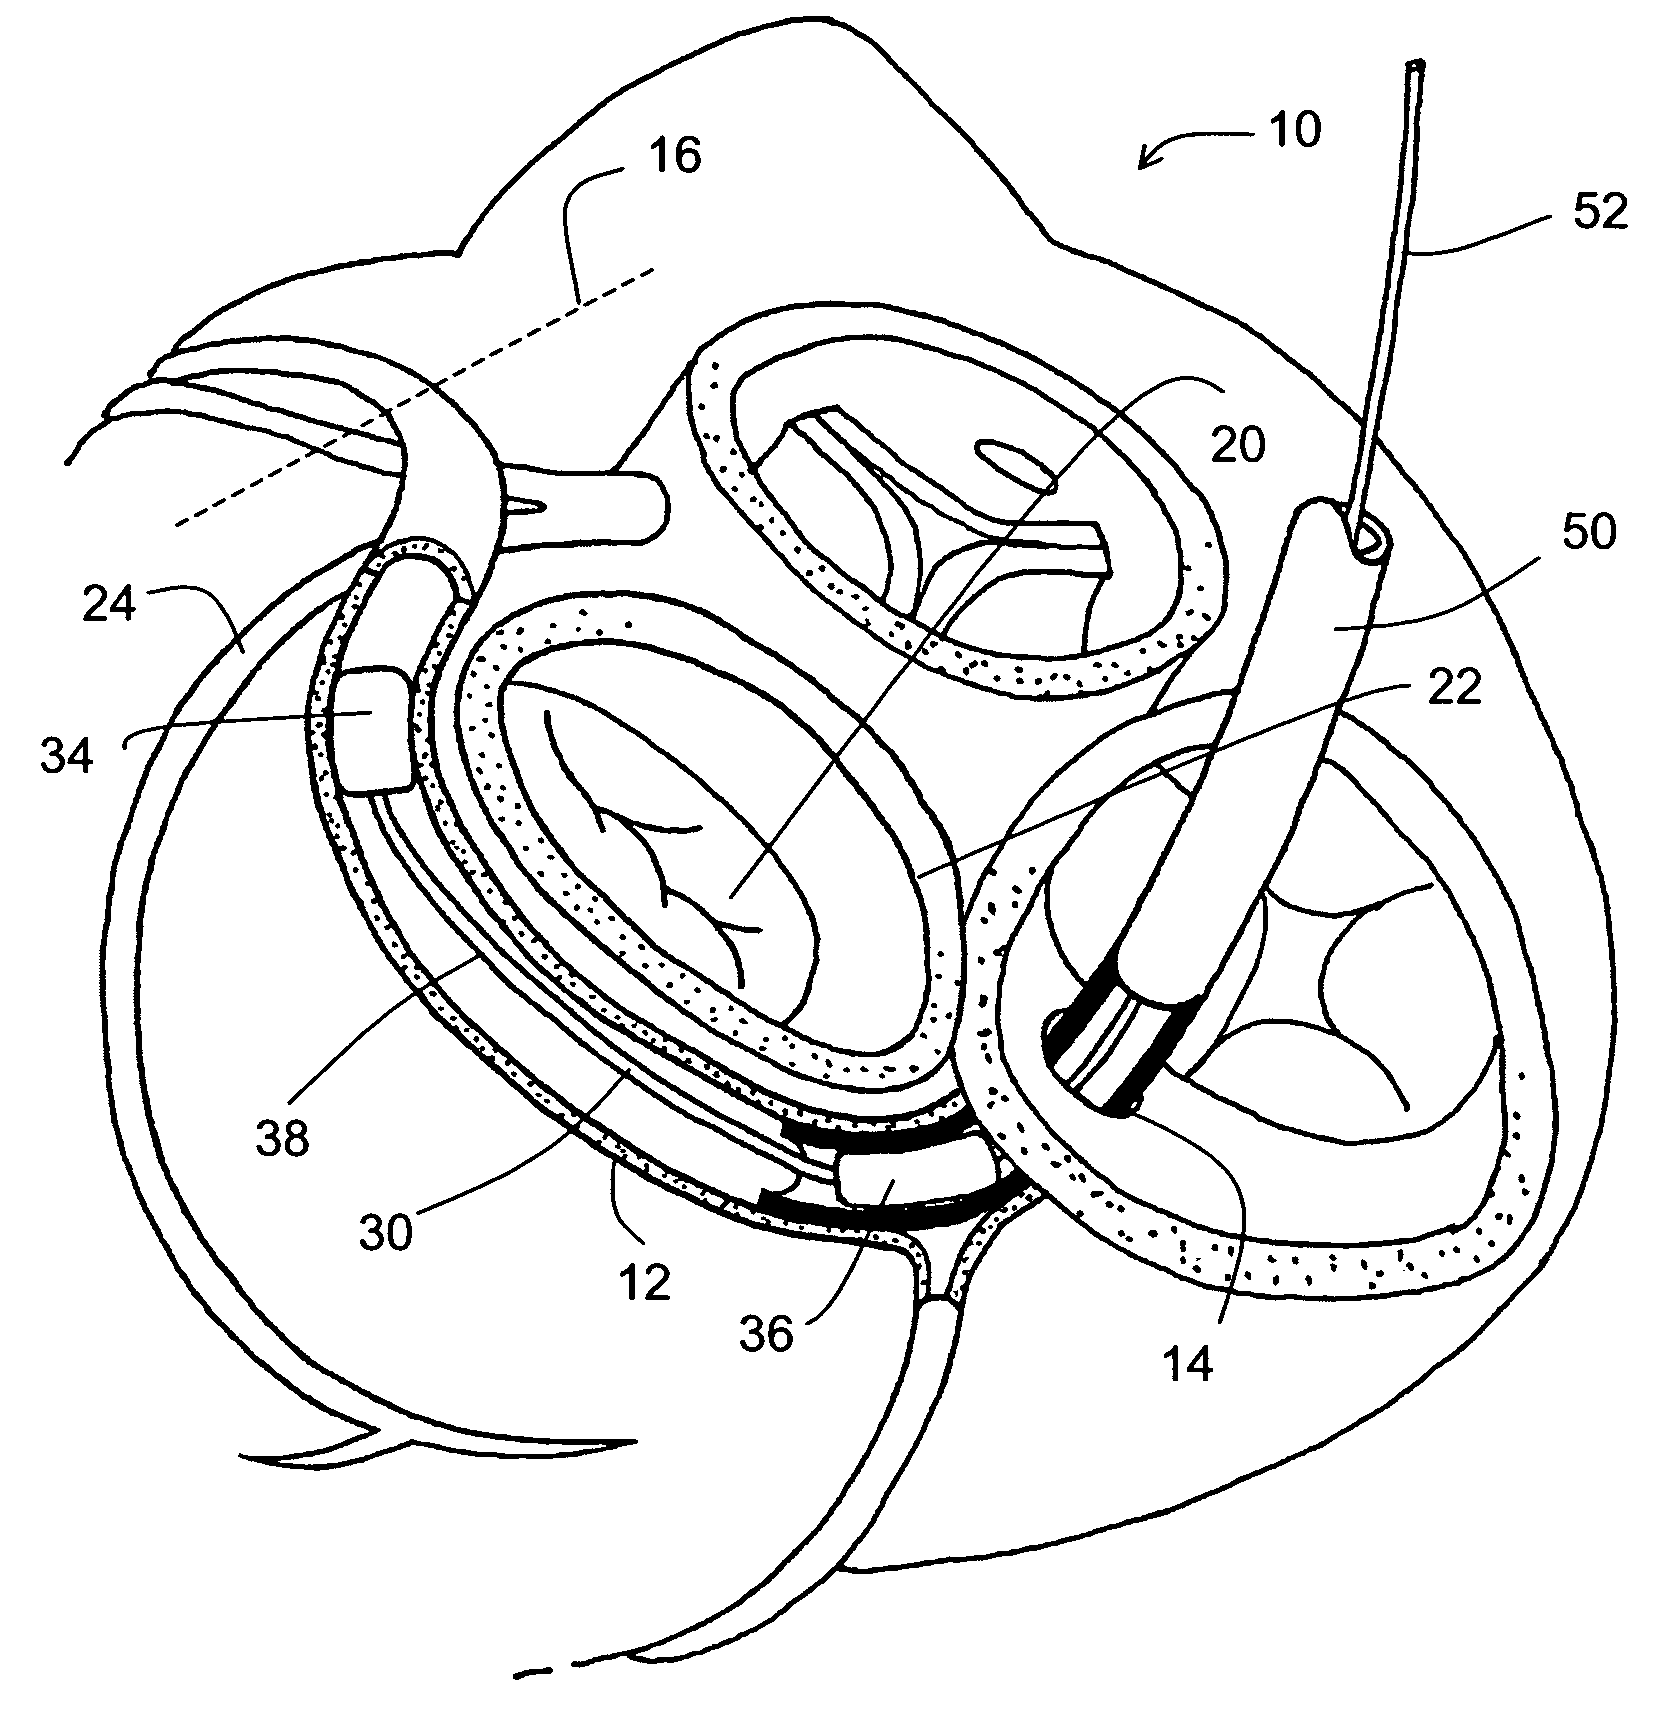 Reduced length tissue shaping device